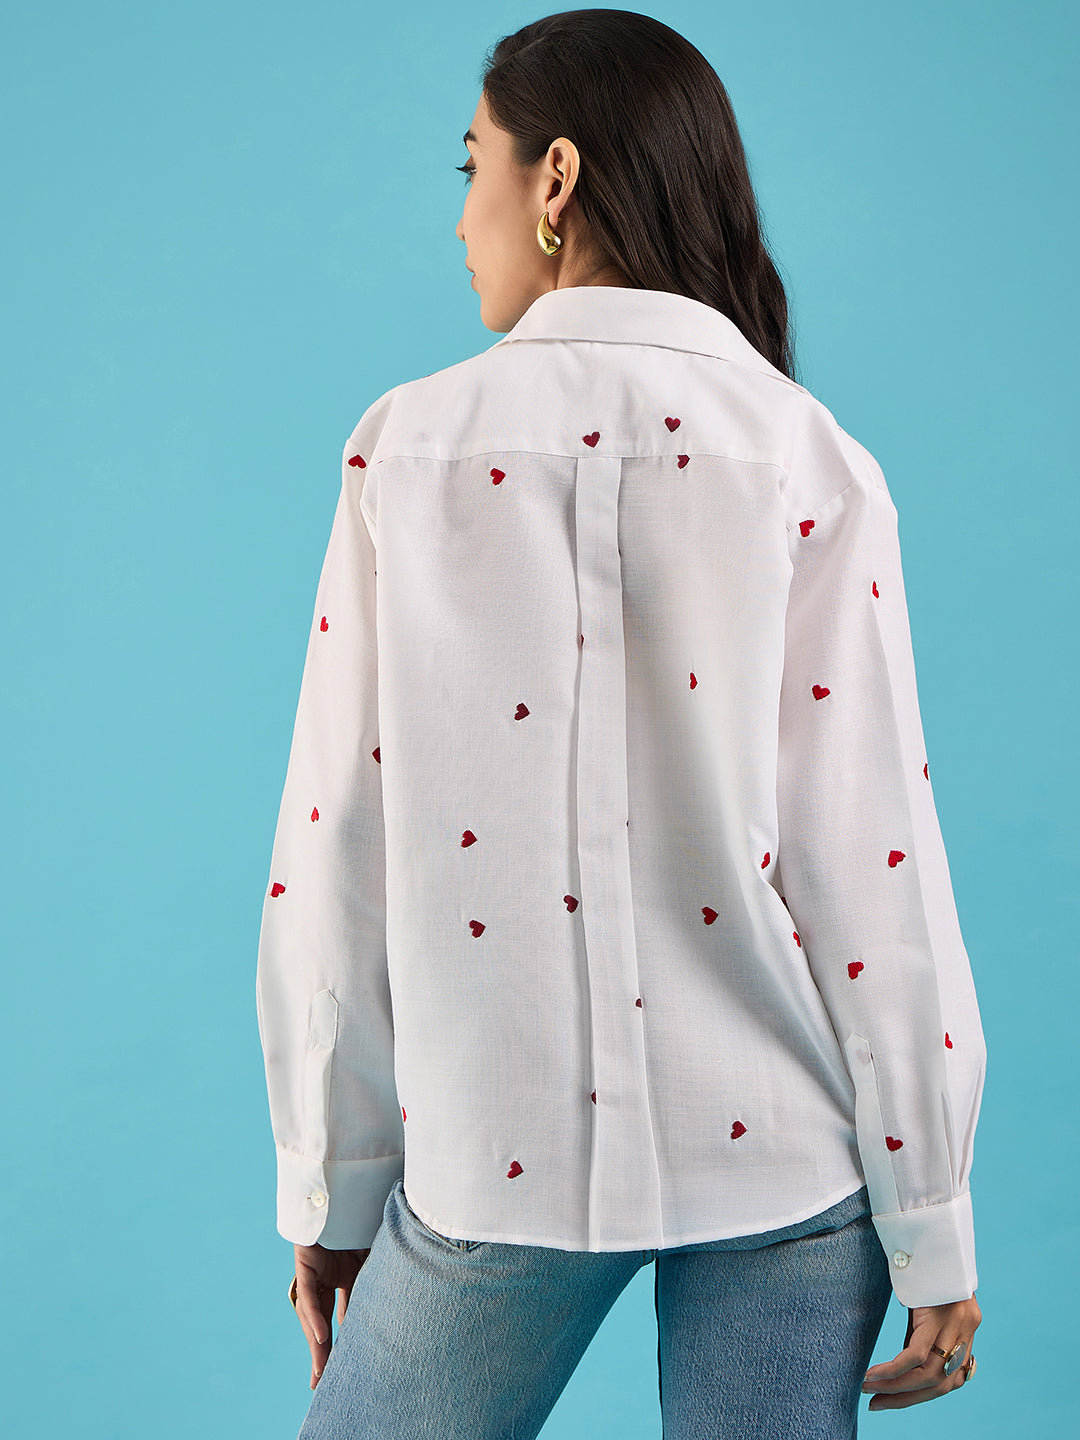 Embroidered Cotton Shirt with Hearts - Uptownie